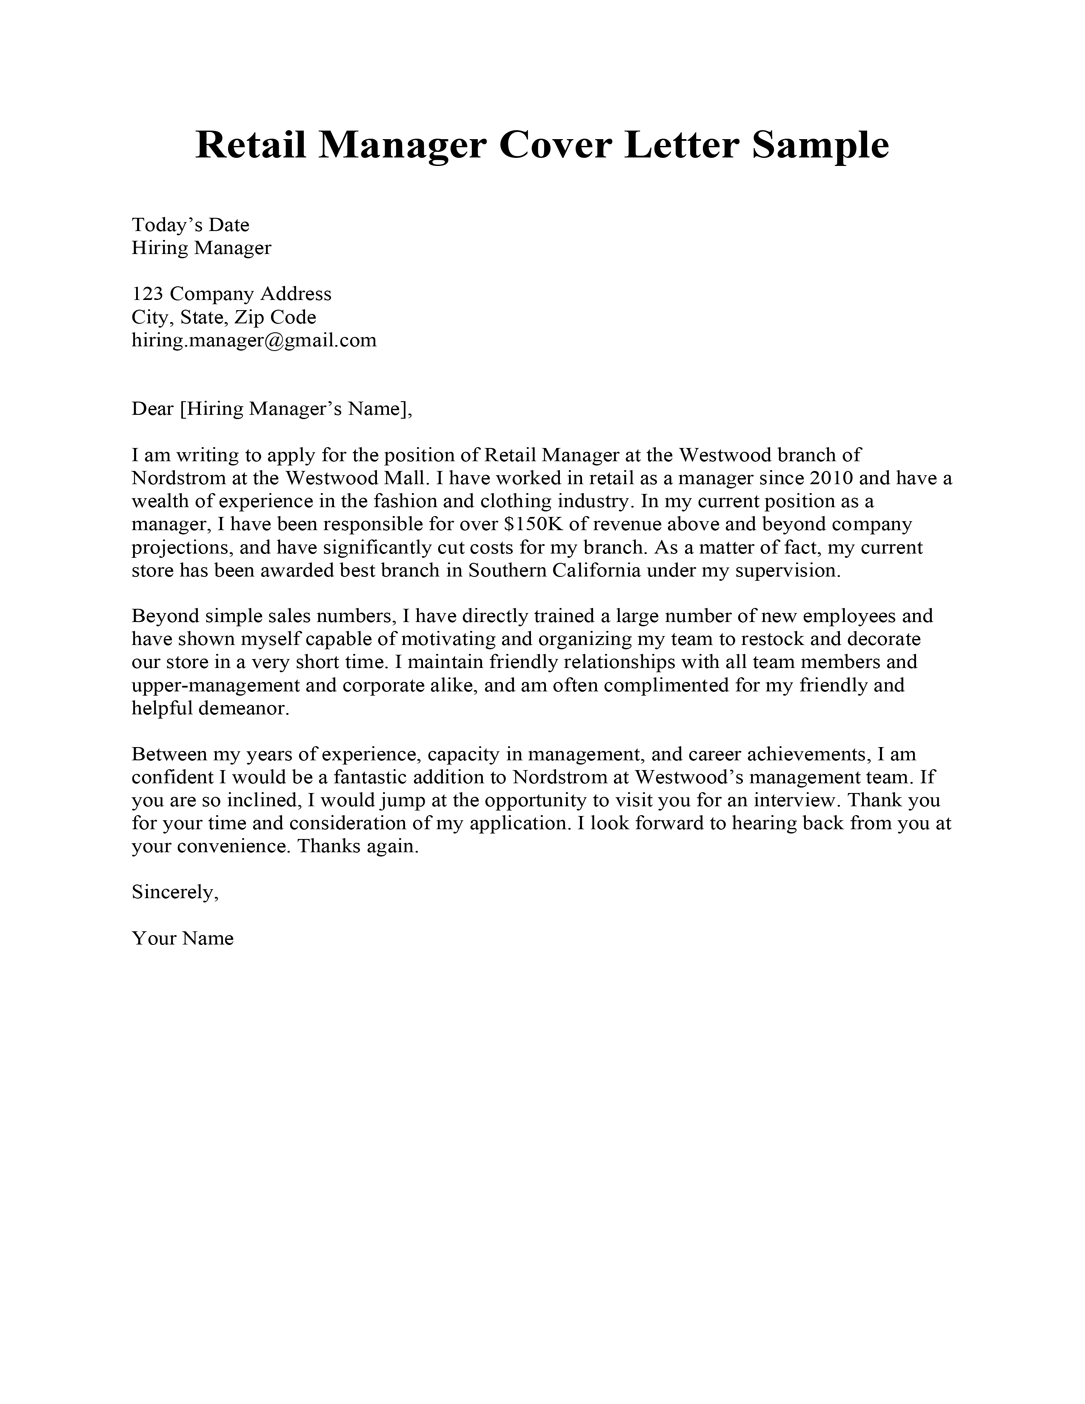 Customer Service Cover Letter Copy And Paste from resumecompanion.com